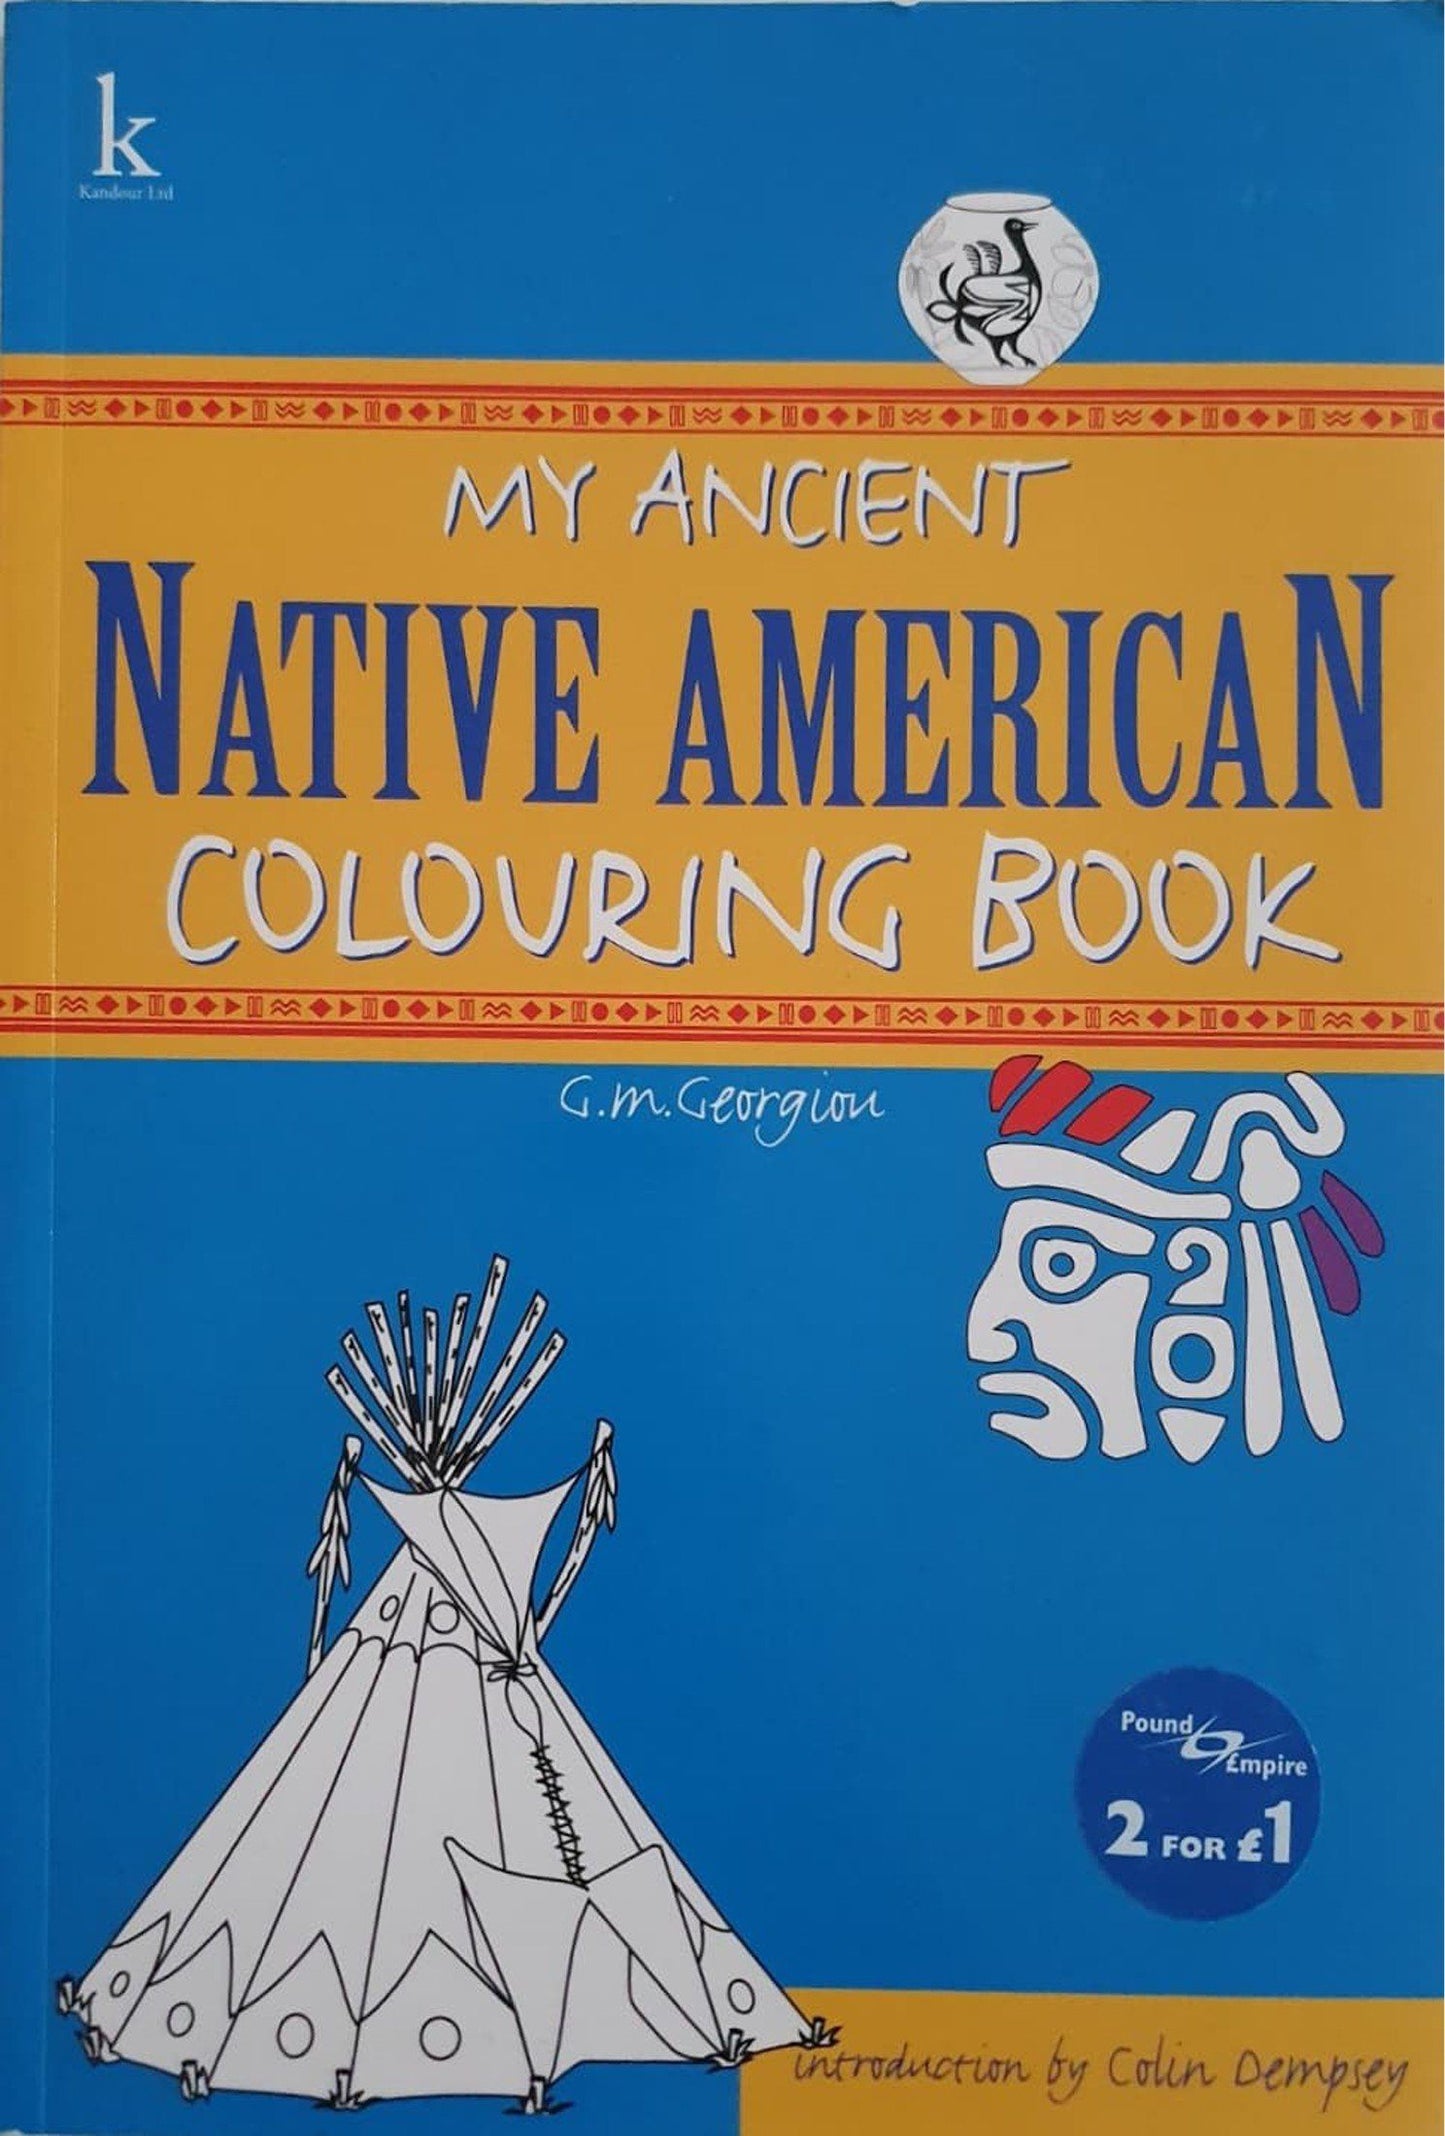 Native American Colouring Book Like New Recuddles.ch  (6192907518137)